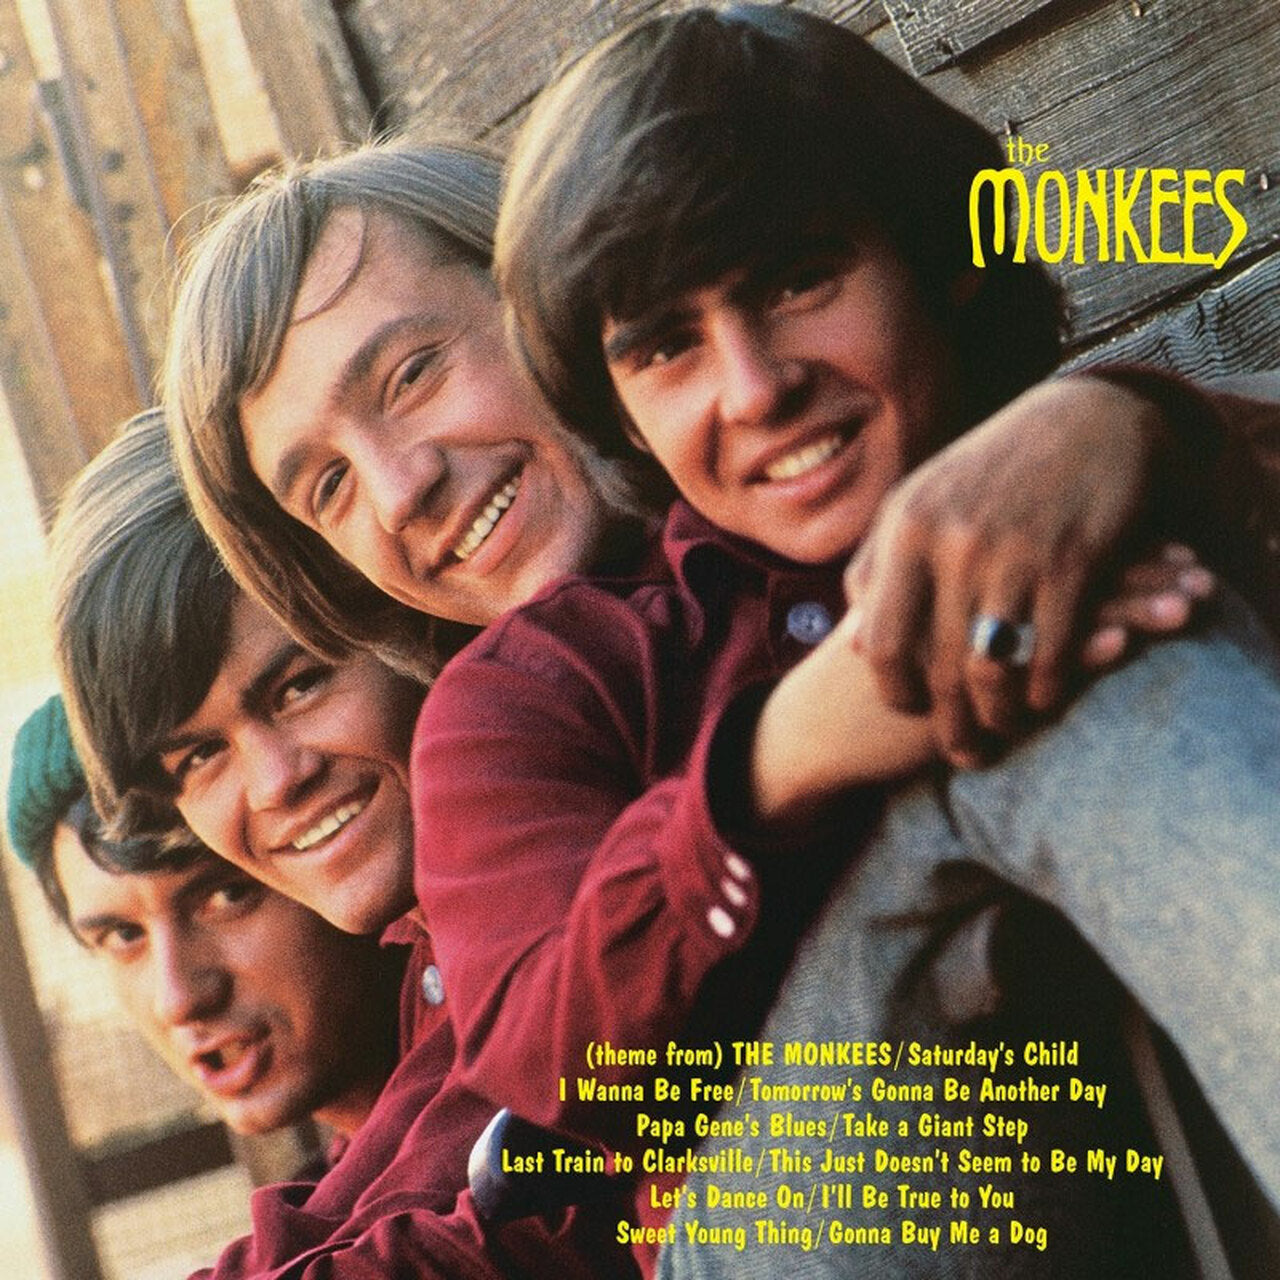 The Monkees - The Monkees - LP